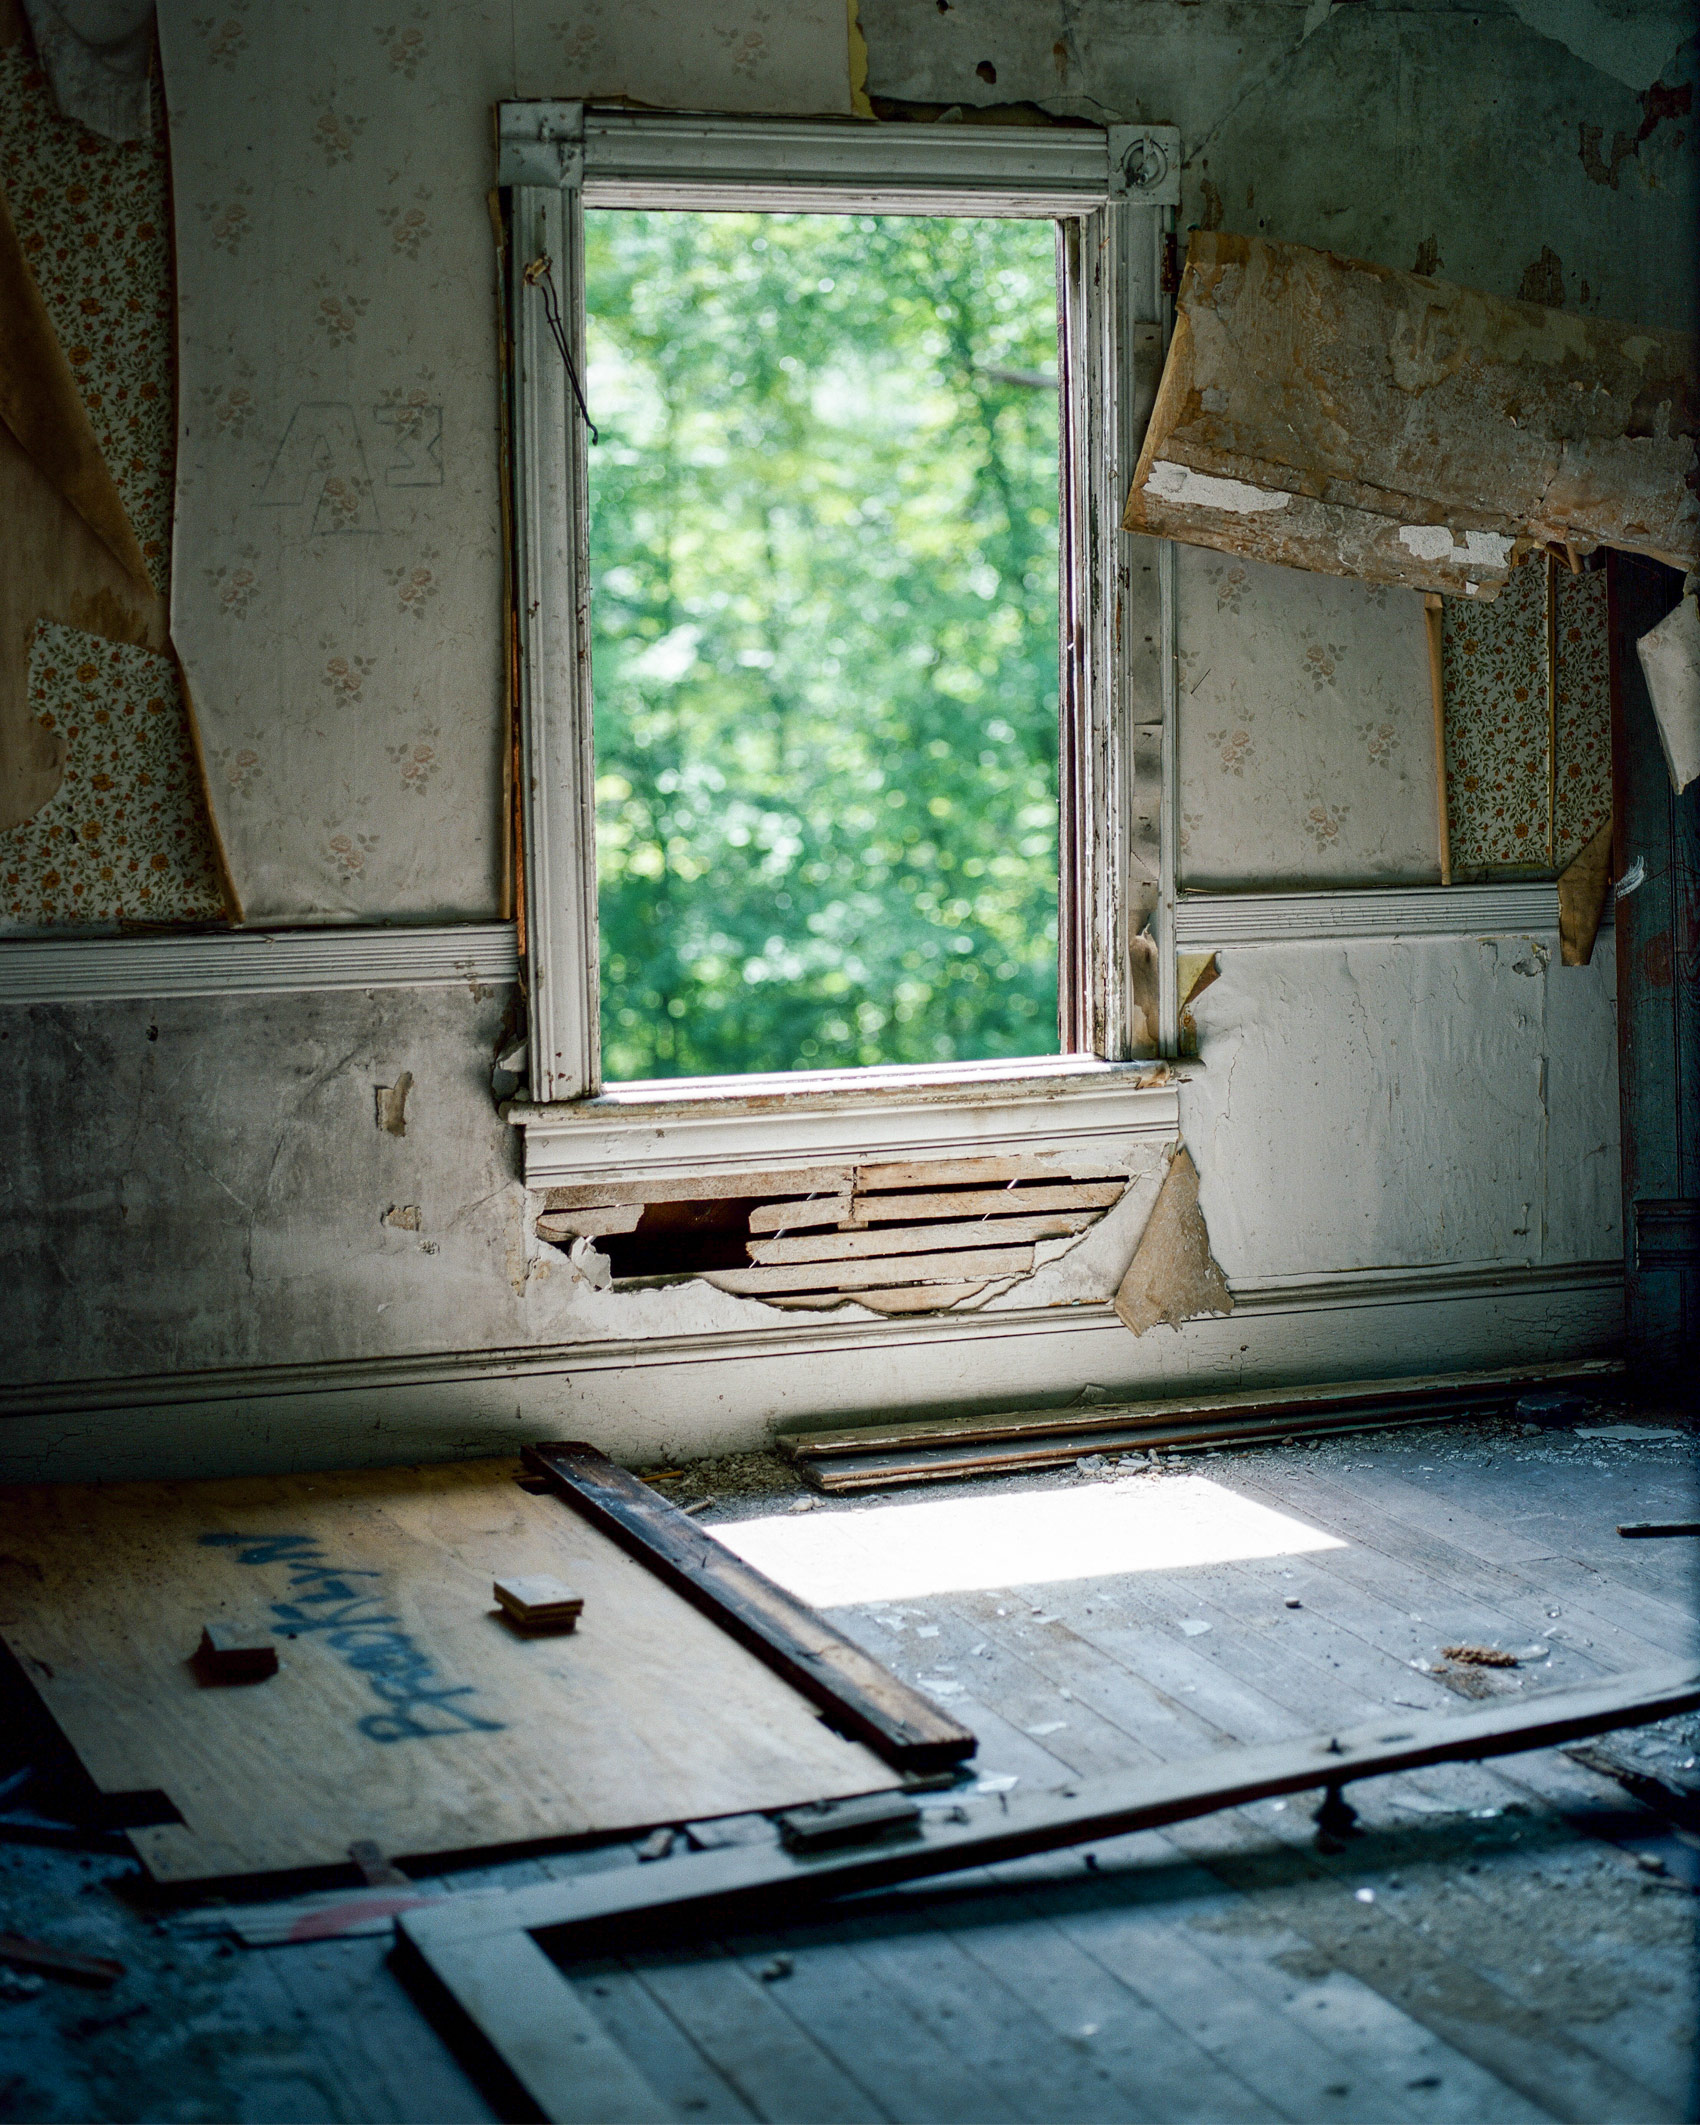 THE-OUTSIDE-LEAVES-OF-A-TREE-POKE-THROUGH-A-ROTTING-WINDOW-IN-A-derelict-HOUSE-IN-NEW-JERSEY